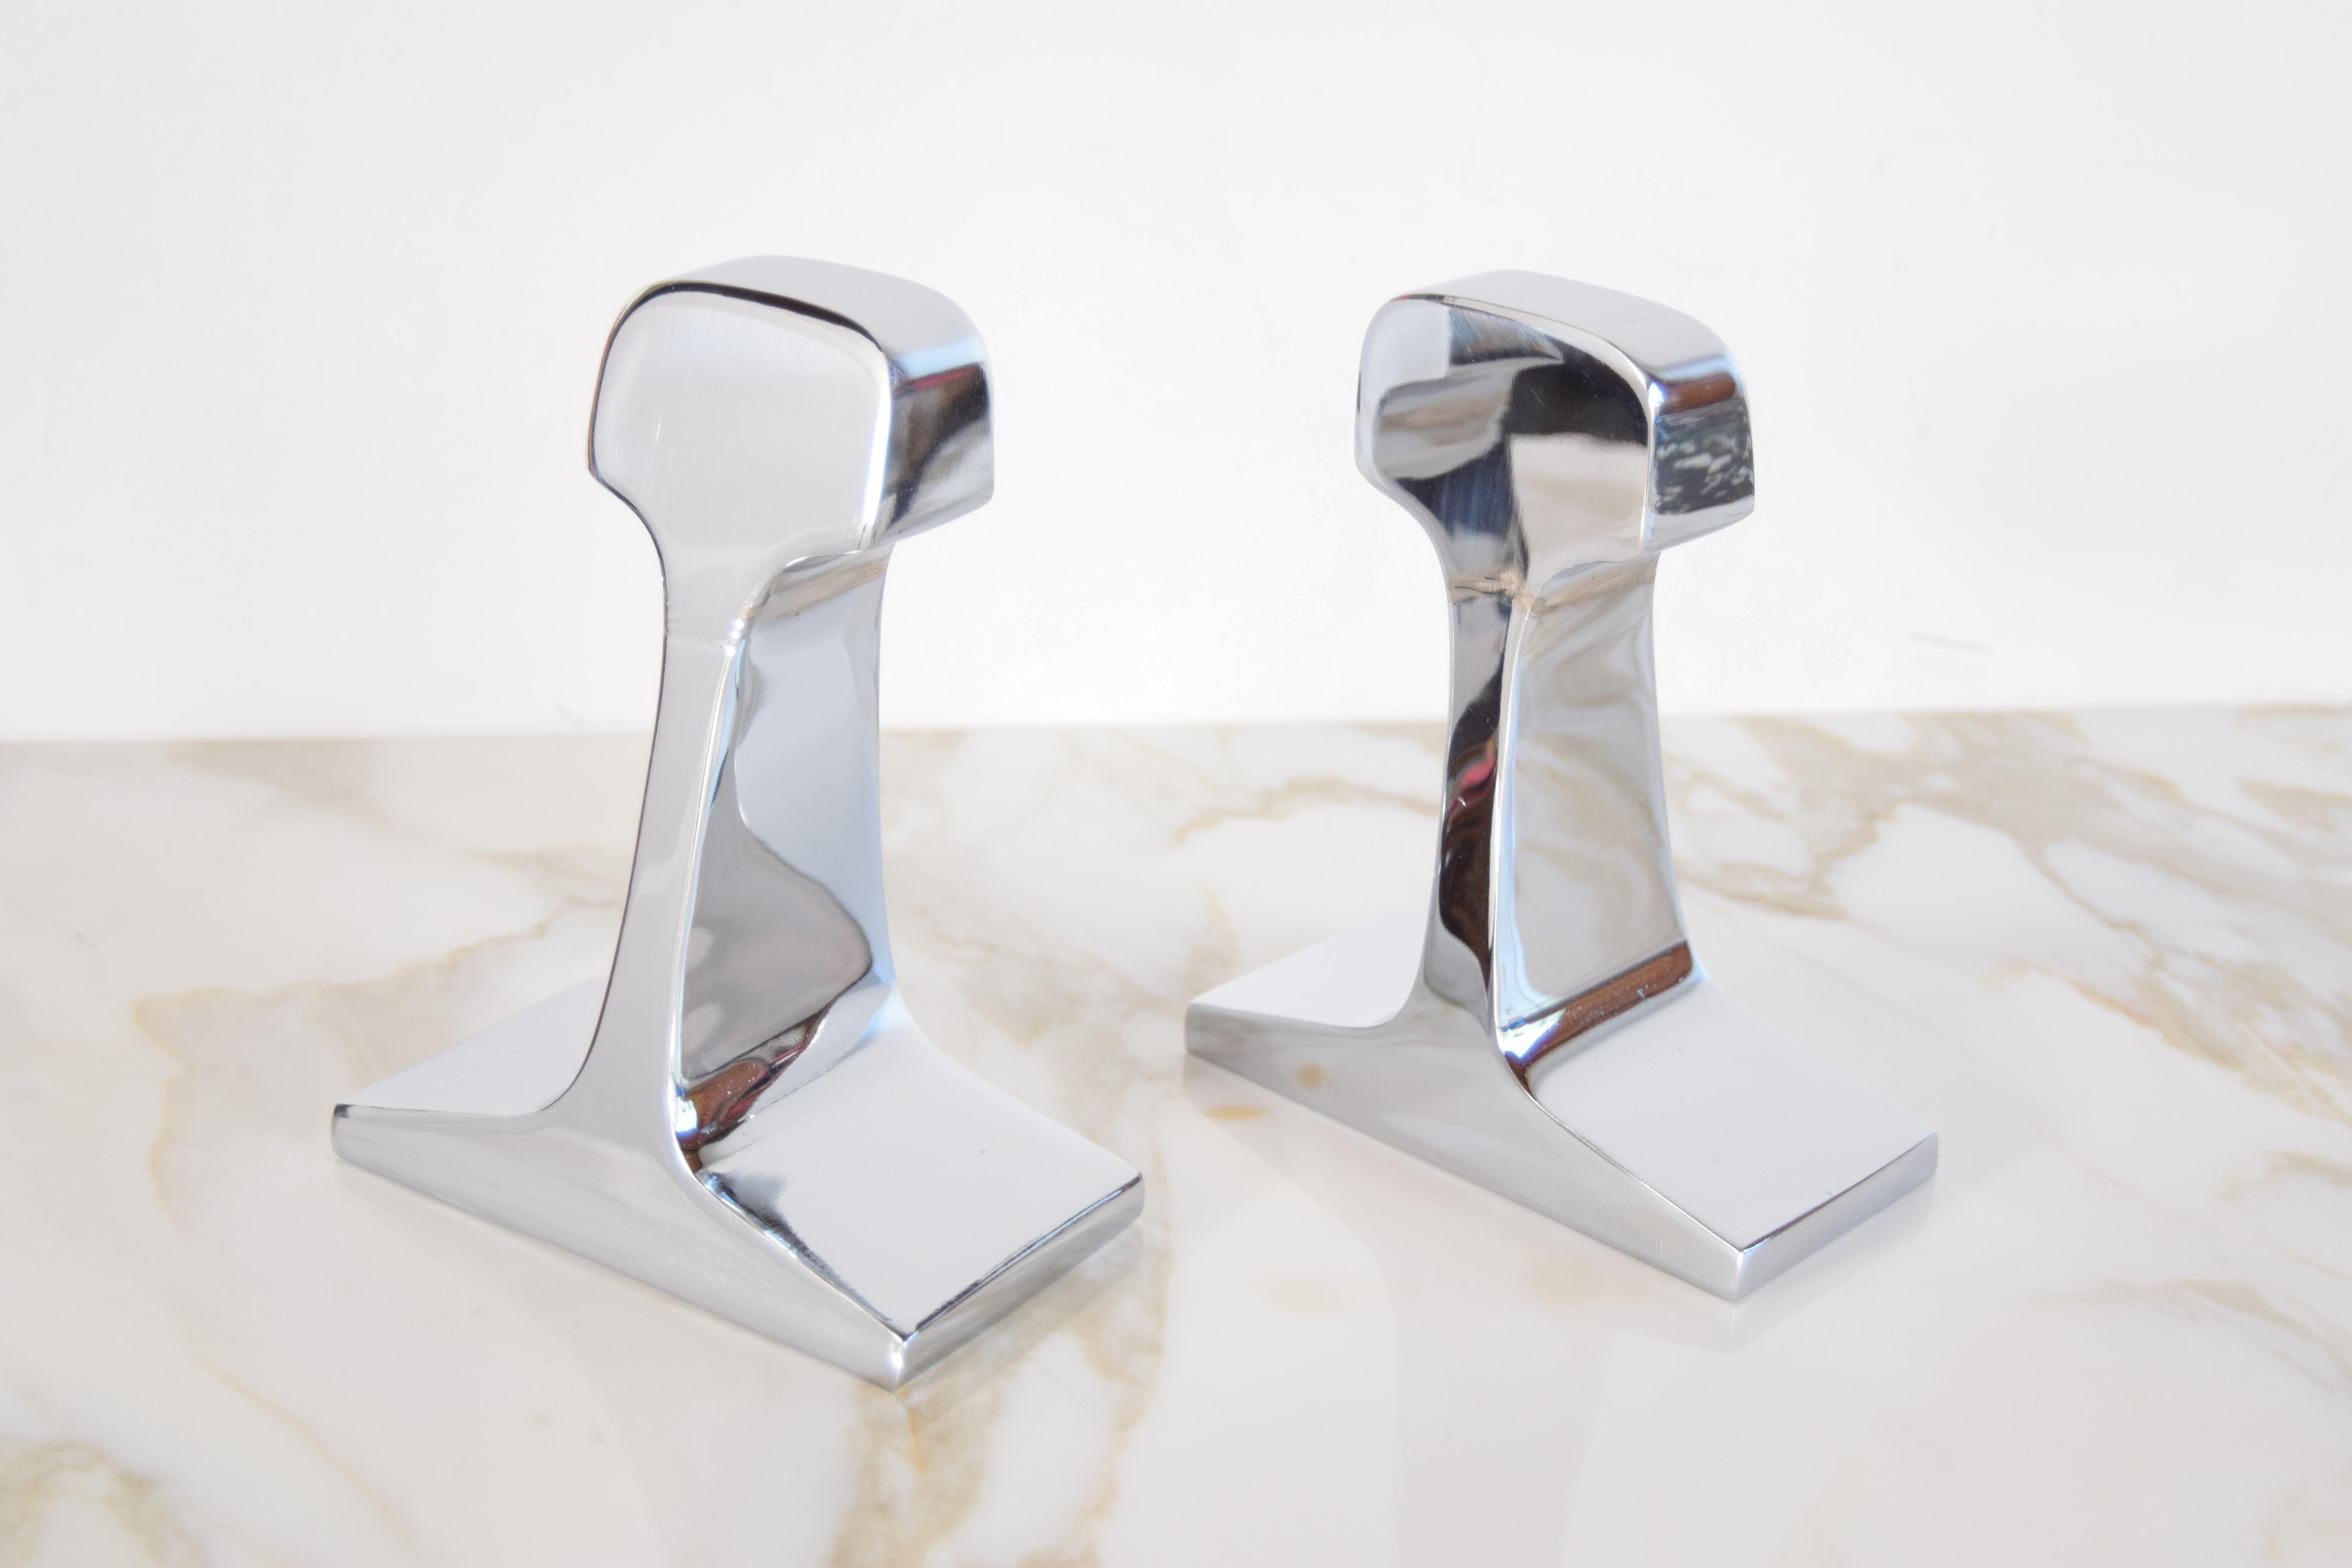 Pair of modernist, nickel-plated railroad tie bookends, circa 1960. Bottoms are felted.

Each piece measures: 5 1/2